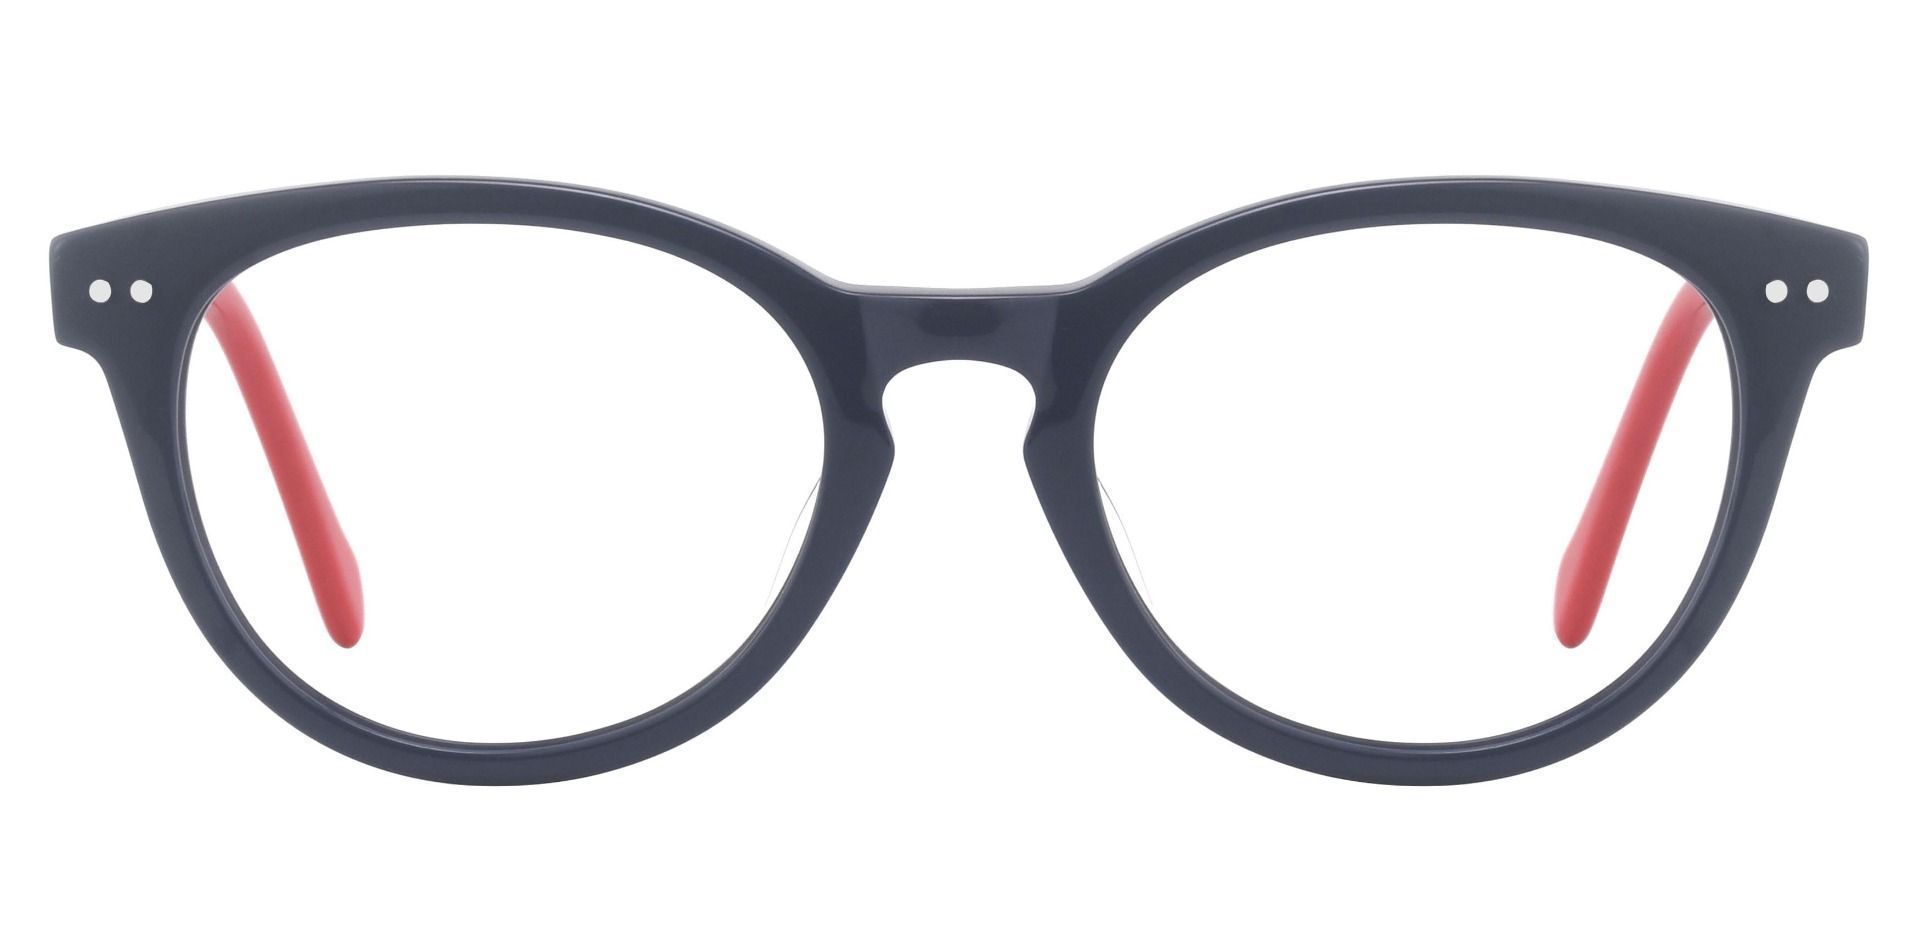 Common Oval Prescription Glasses - The Frame Is Blue And Red